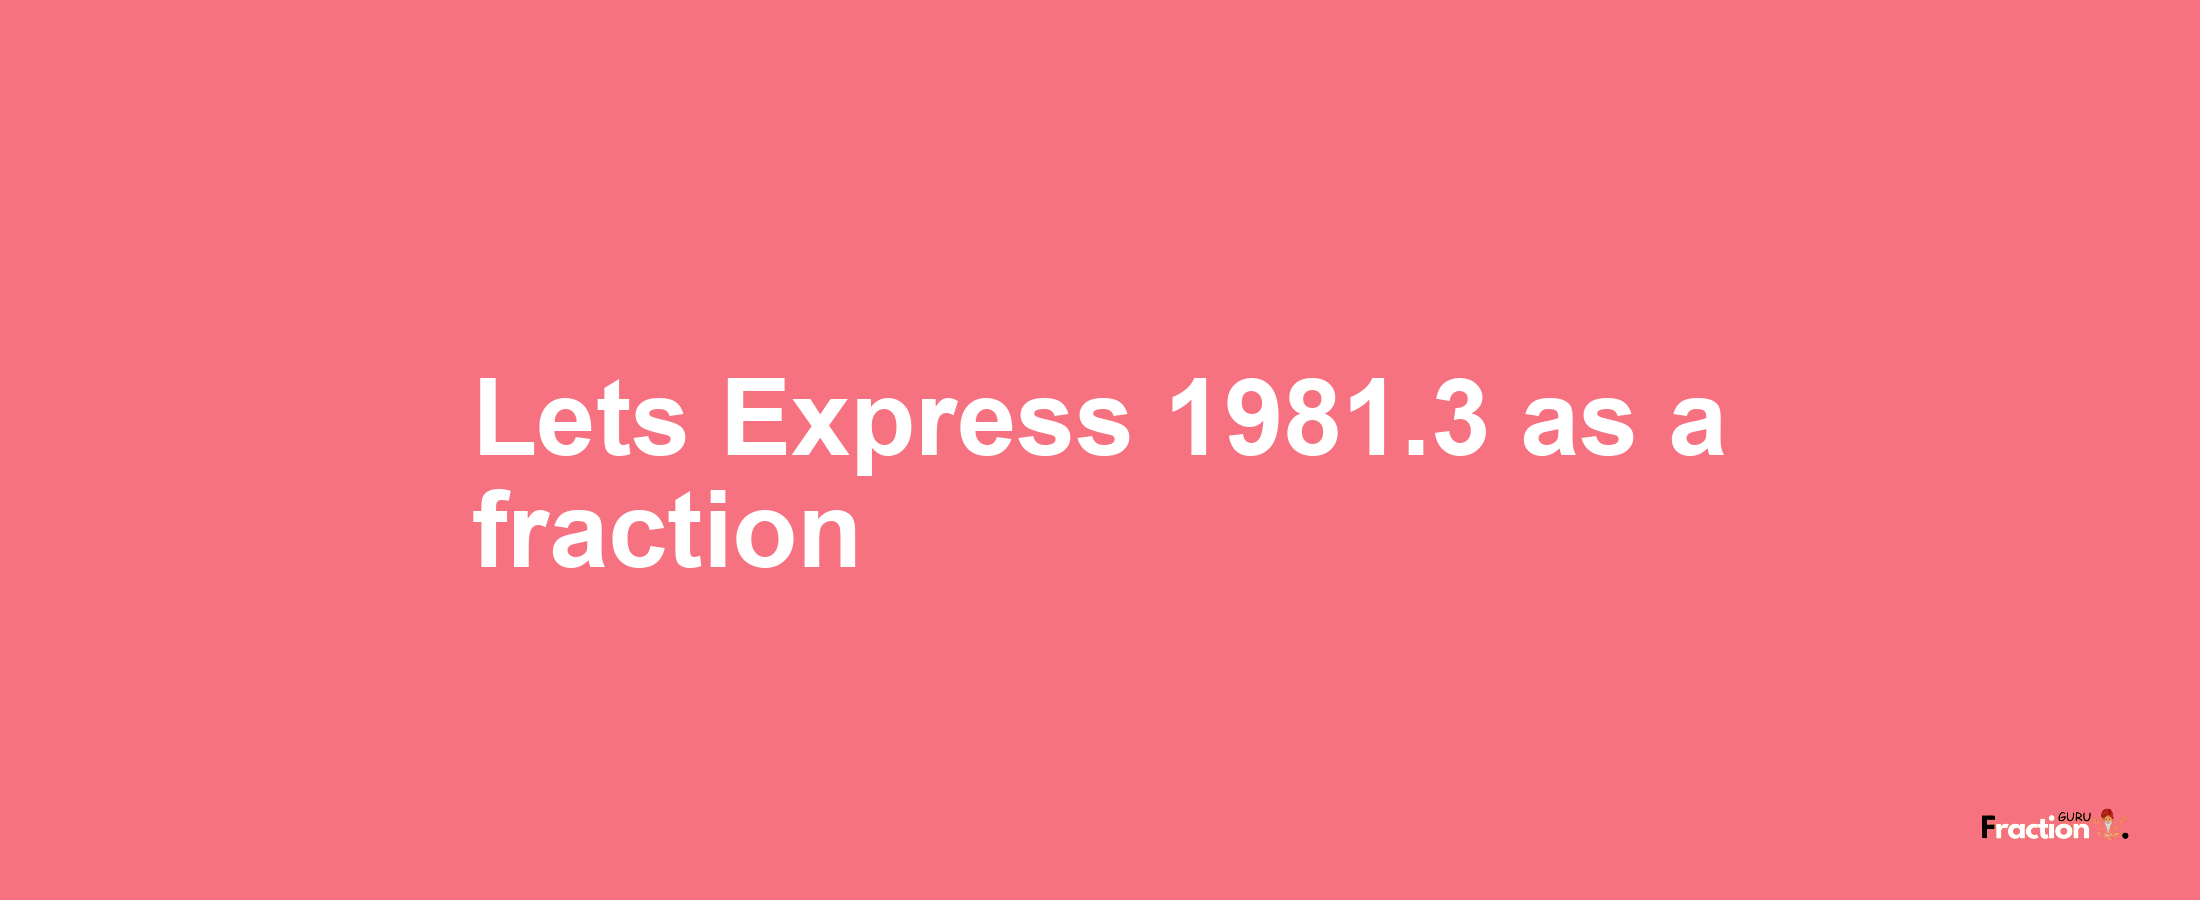 Lets Express 1981.3 as afraction